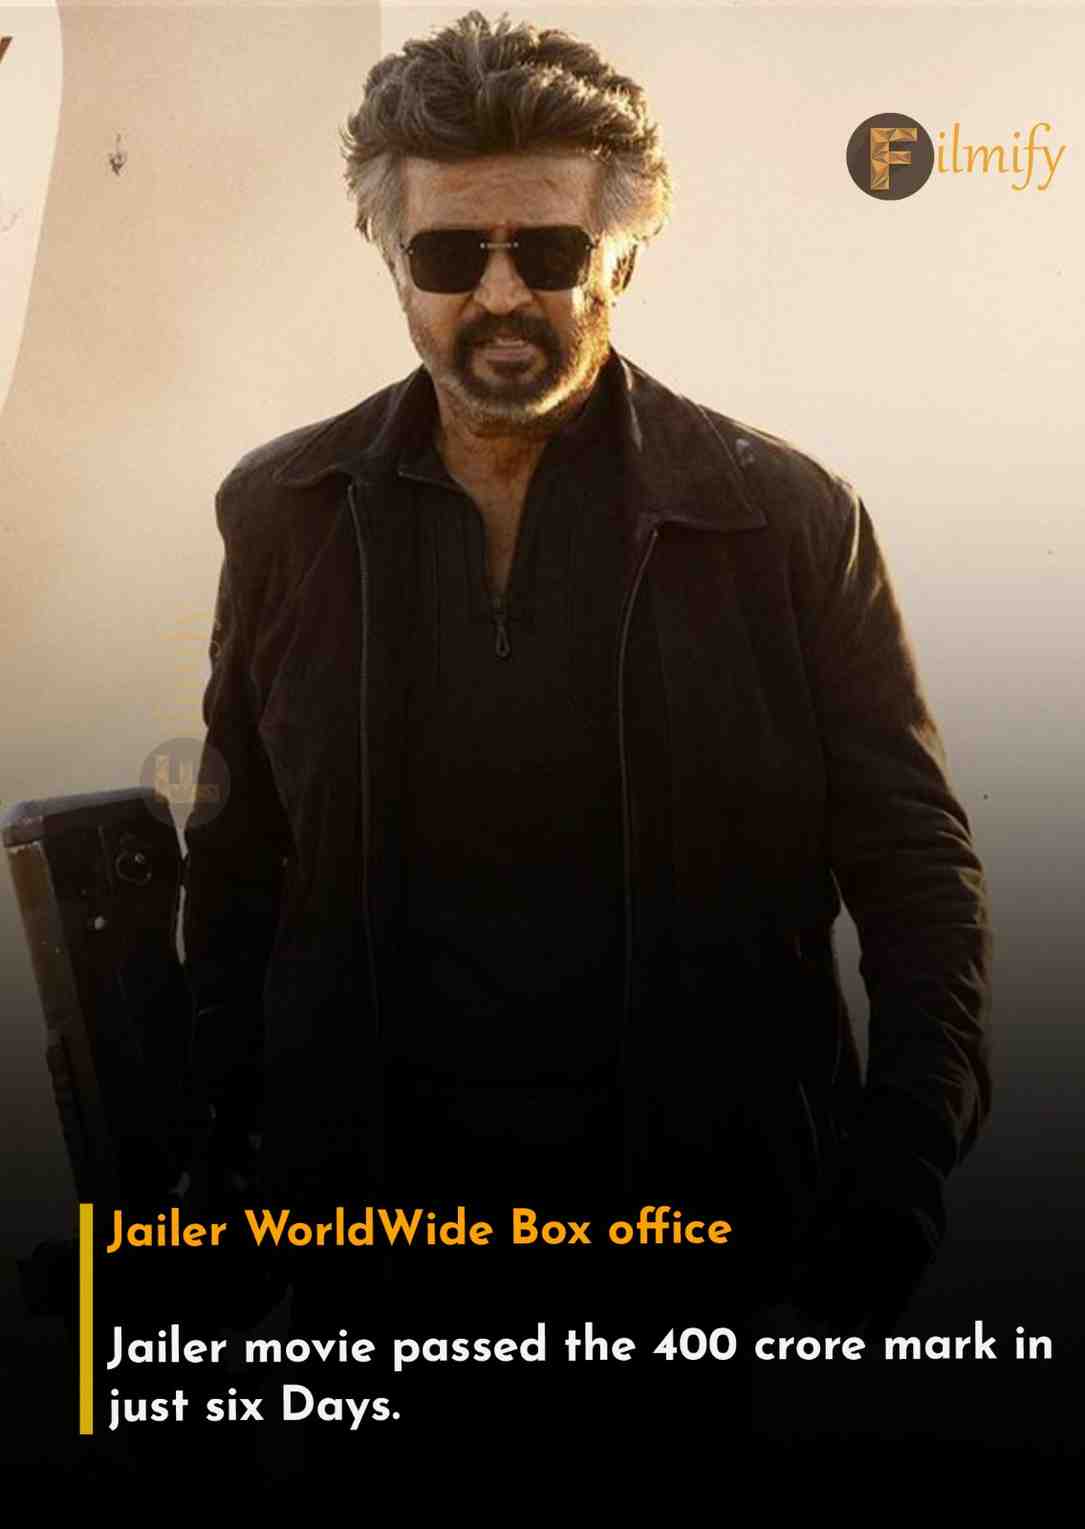 Jailer 6 days WW Box office collections